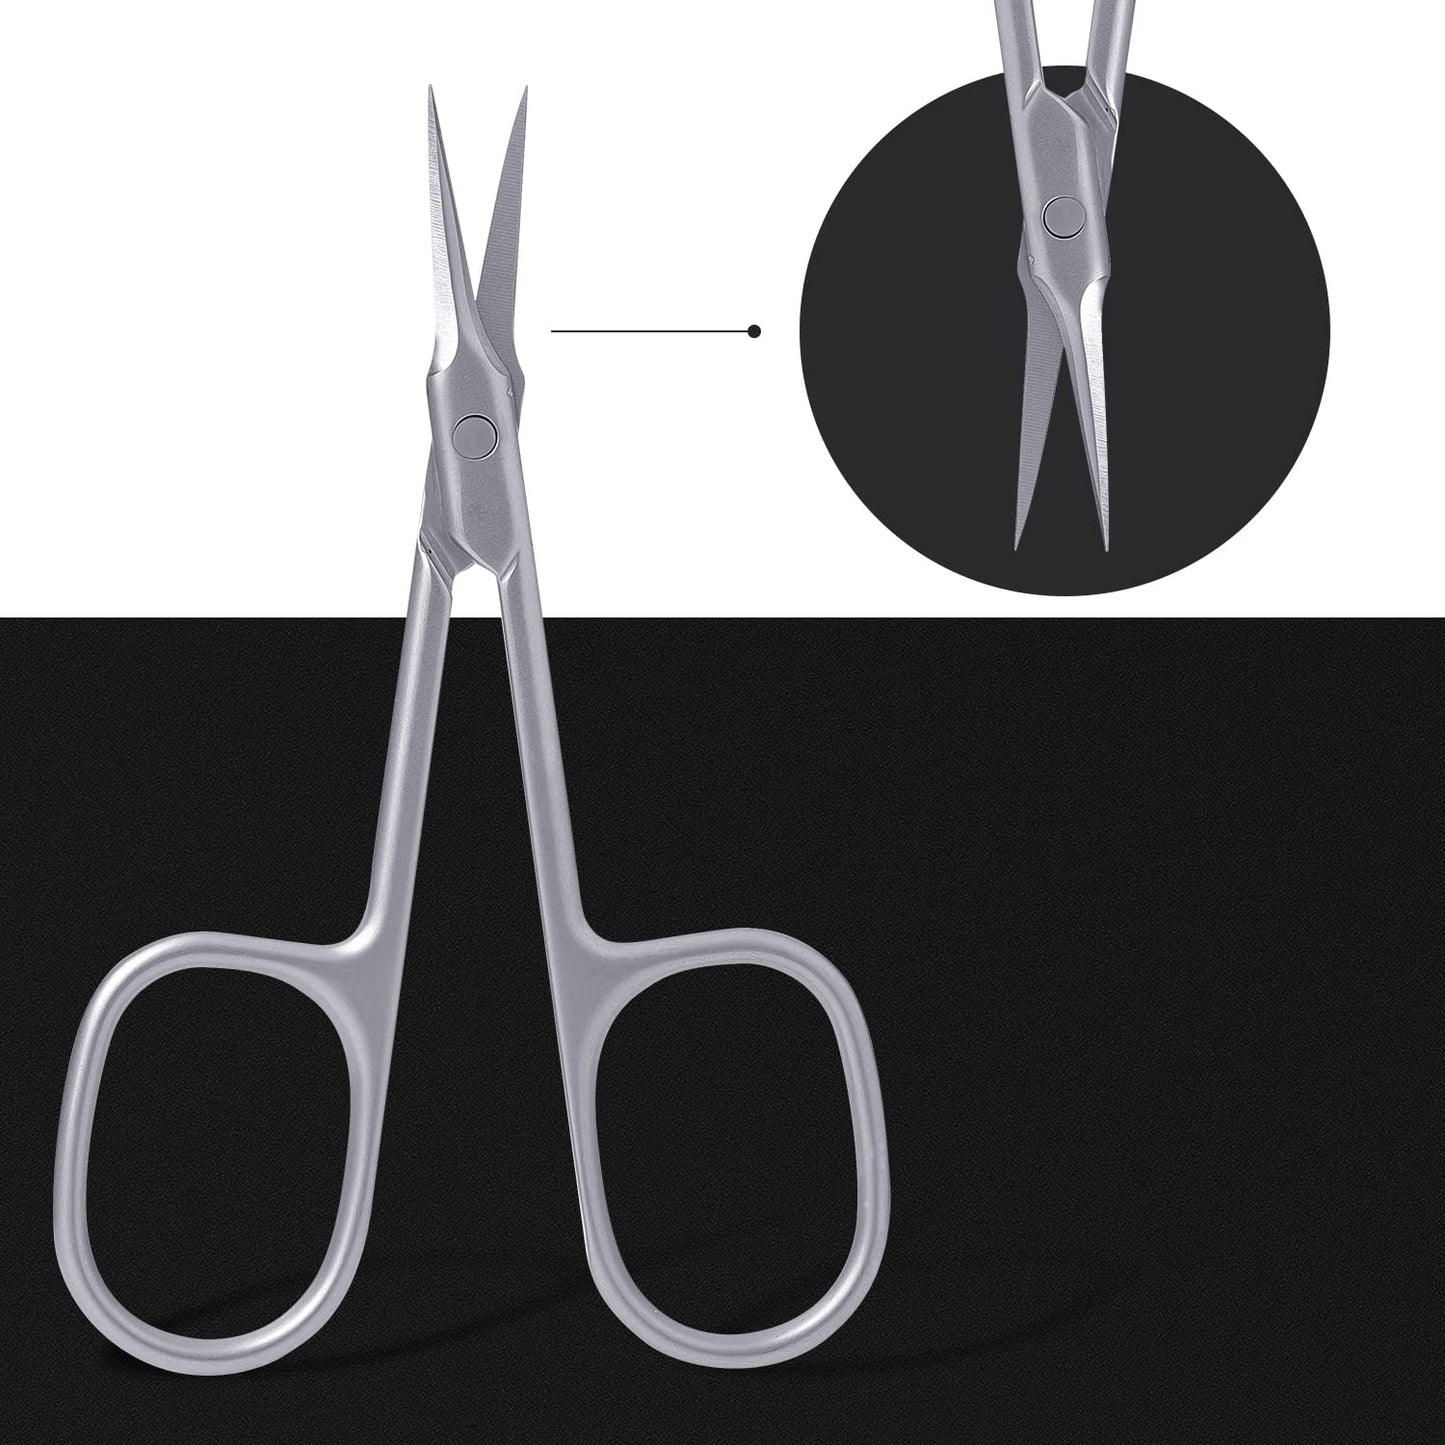 KINBOM 2pcs Cuticle Scissors, Extra Fine Straight/Curved Blade Scissors for Eyebrow Eyelash Nails Multi-Purposed Fine Small Scissors for Manicure Pedicure Beauty Grooming